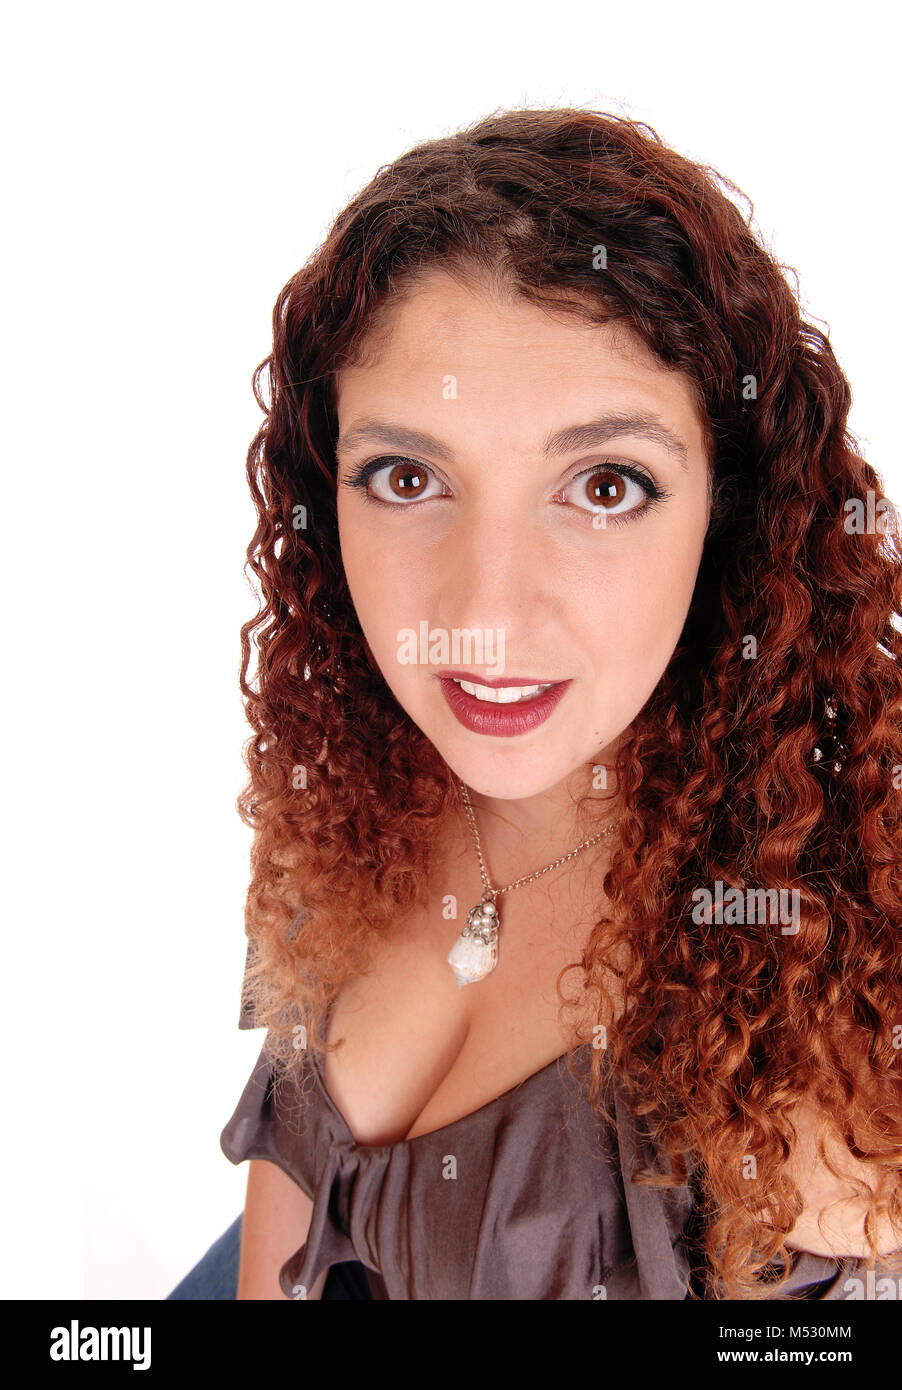 Portrait of beautiful woman with curly brunette hair Stock Photo